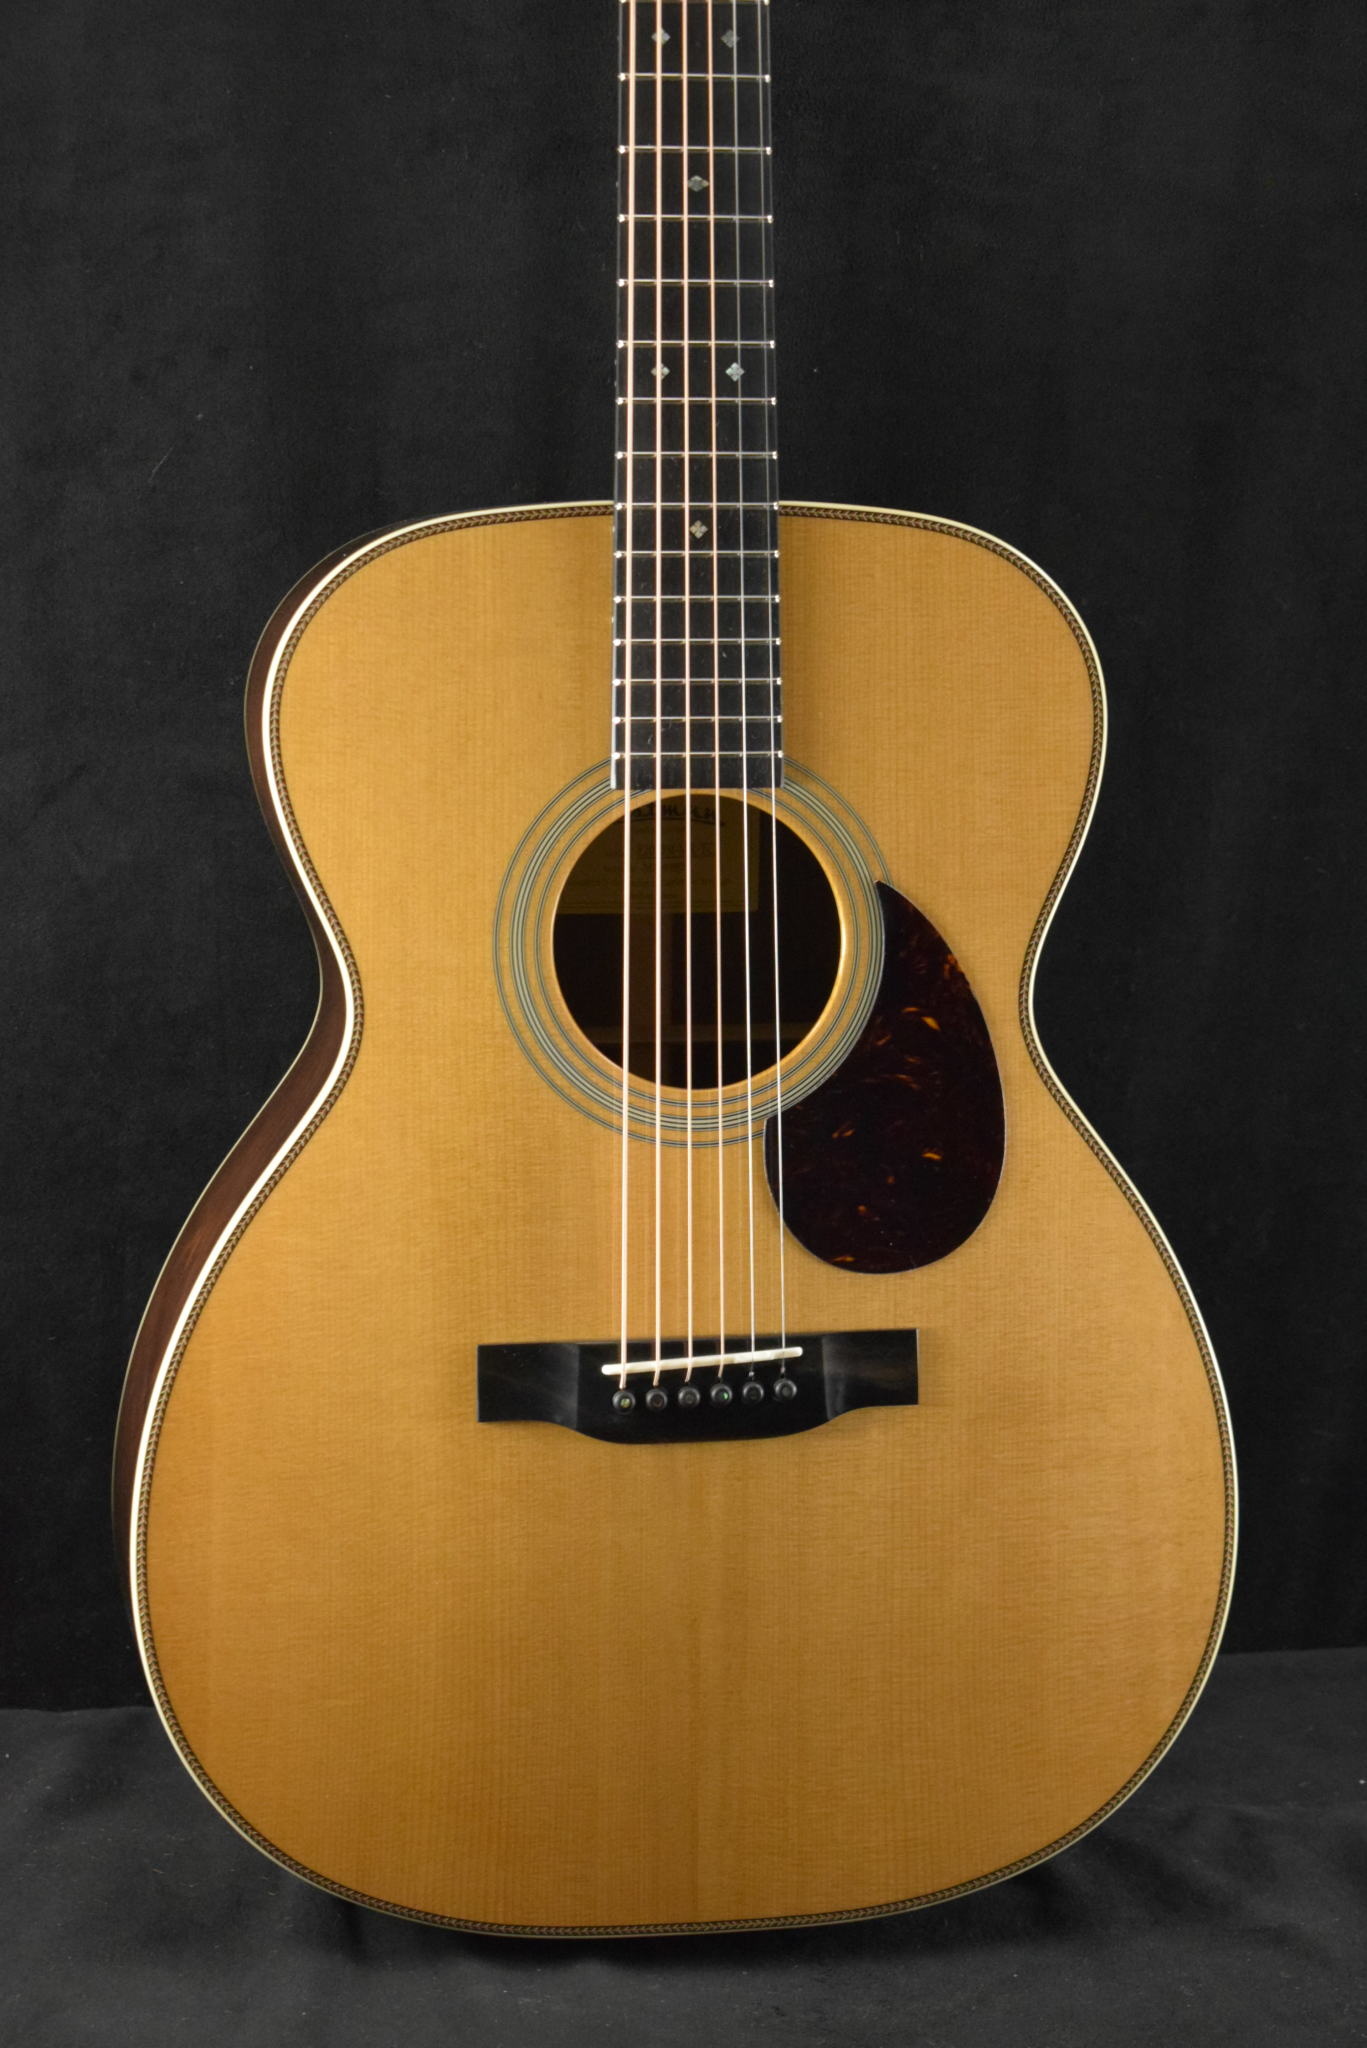 Eastman Eastman E20OM-MR-TC Thermo-Cured Adirondack Spruce/Madagascar Rosewood Orchestra Model Natural Gloss